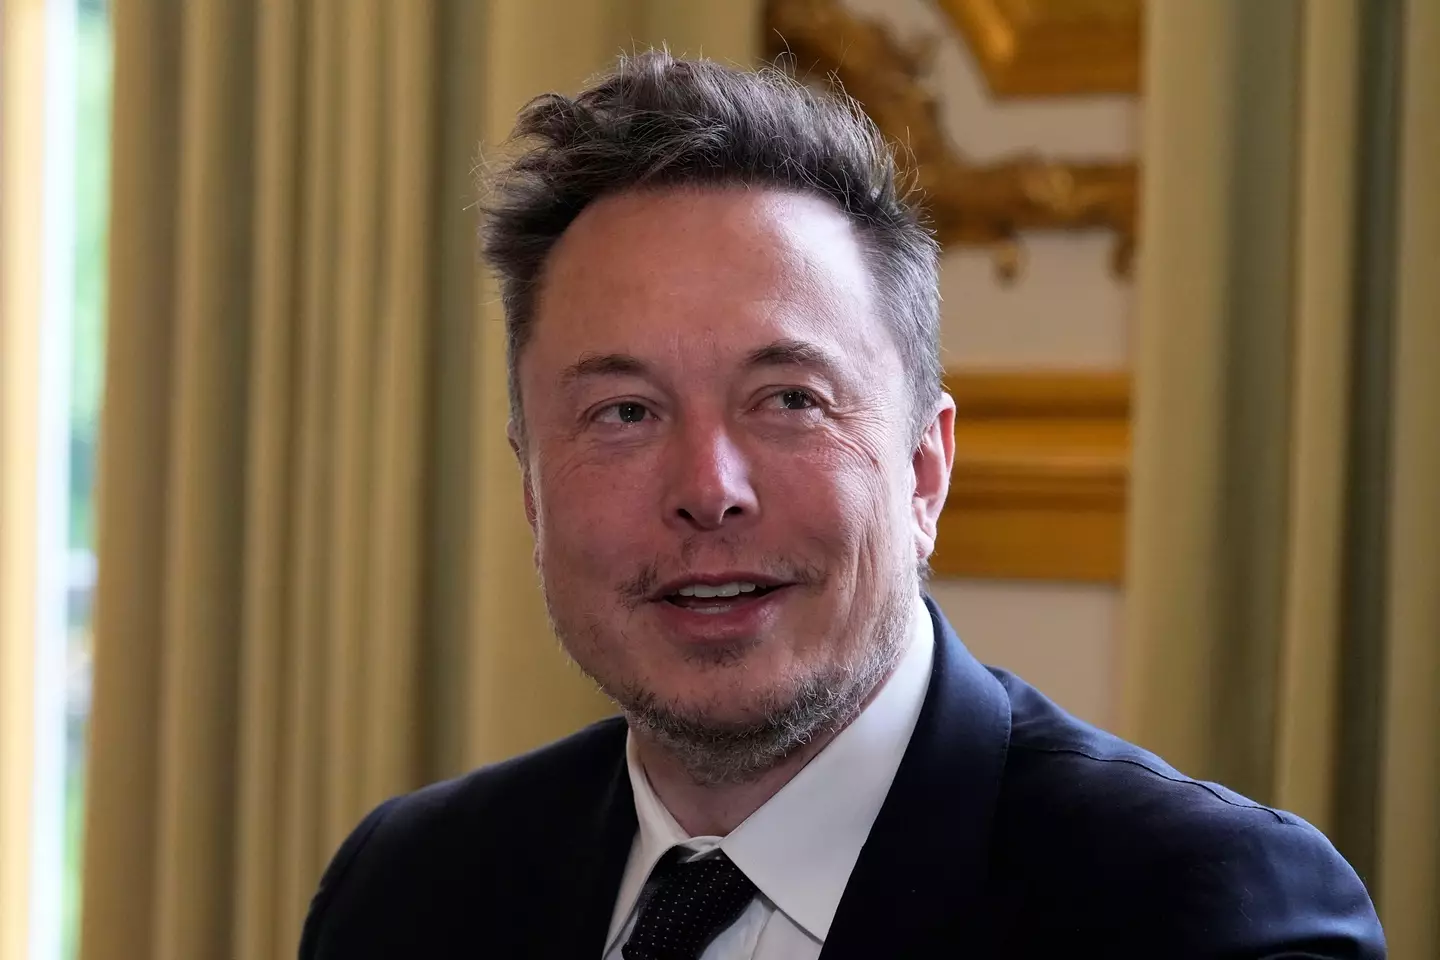 Elon Musk went viral for his dance moves this week.